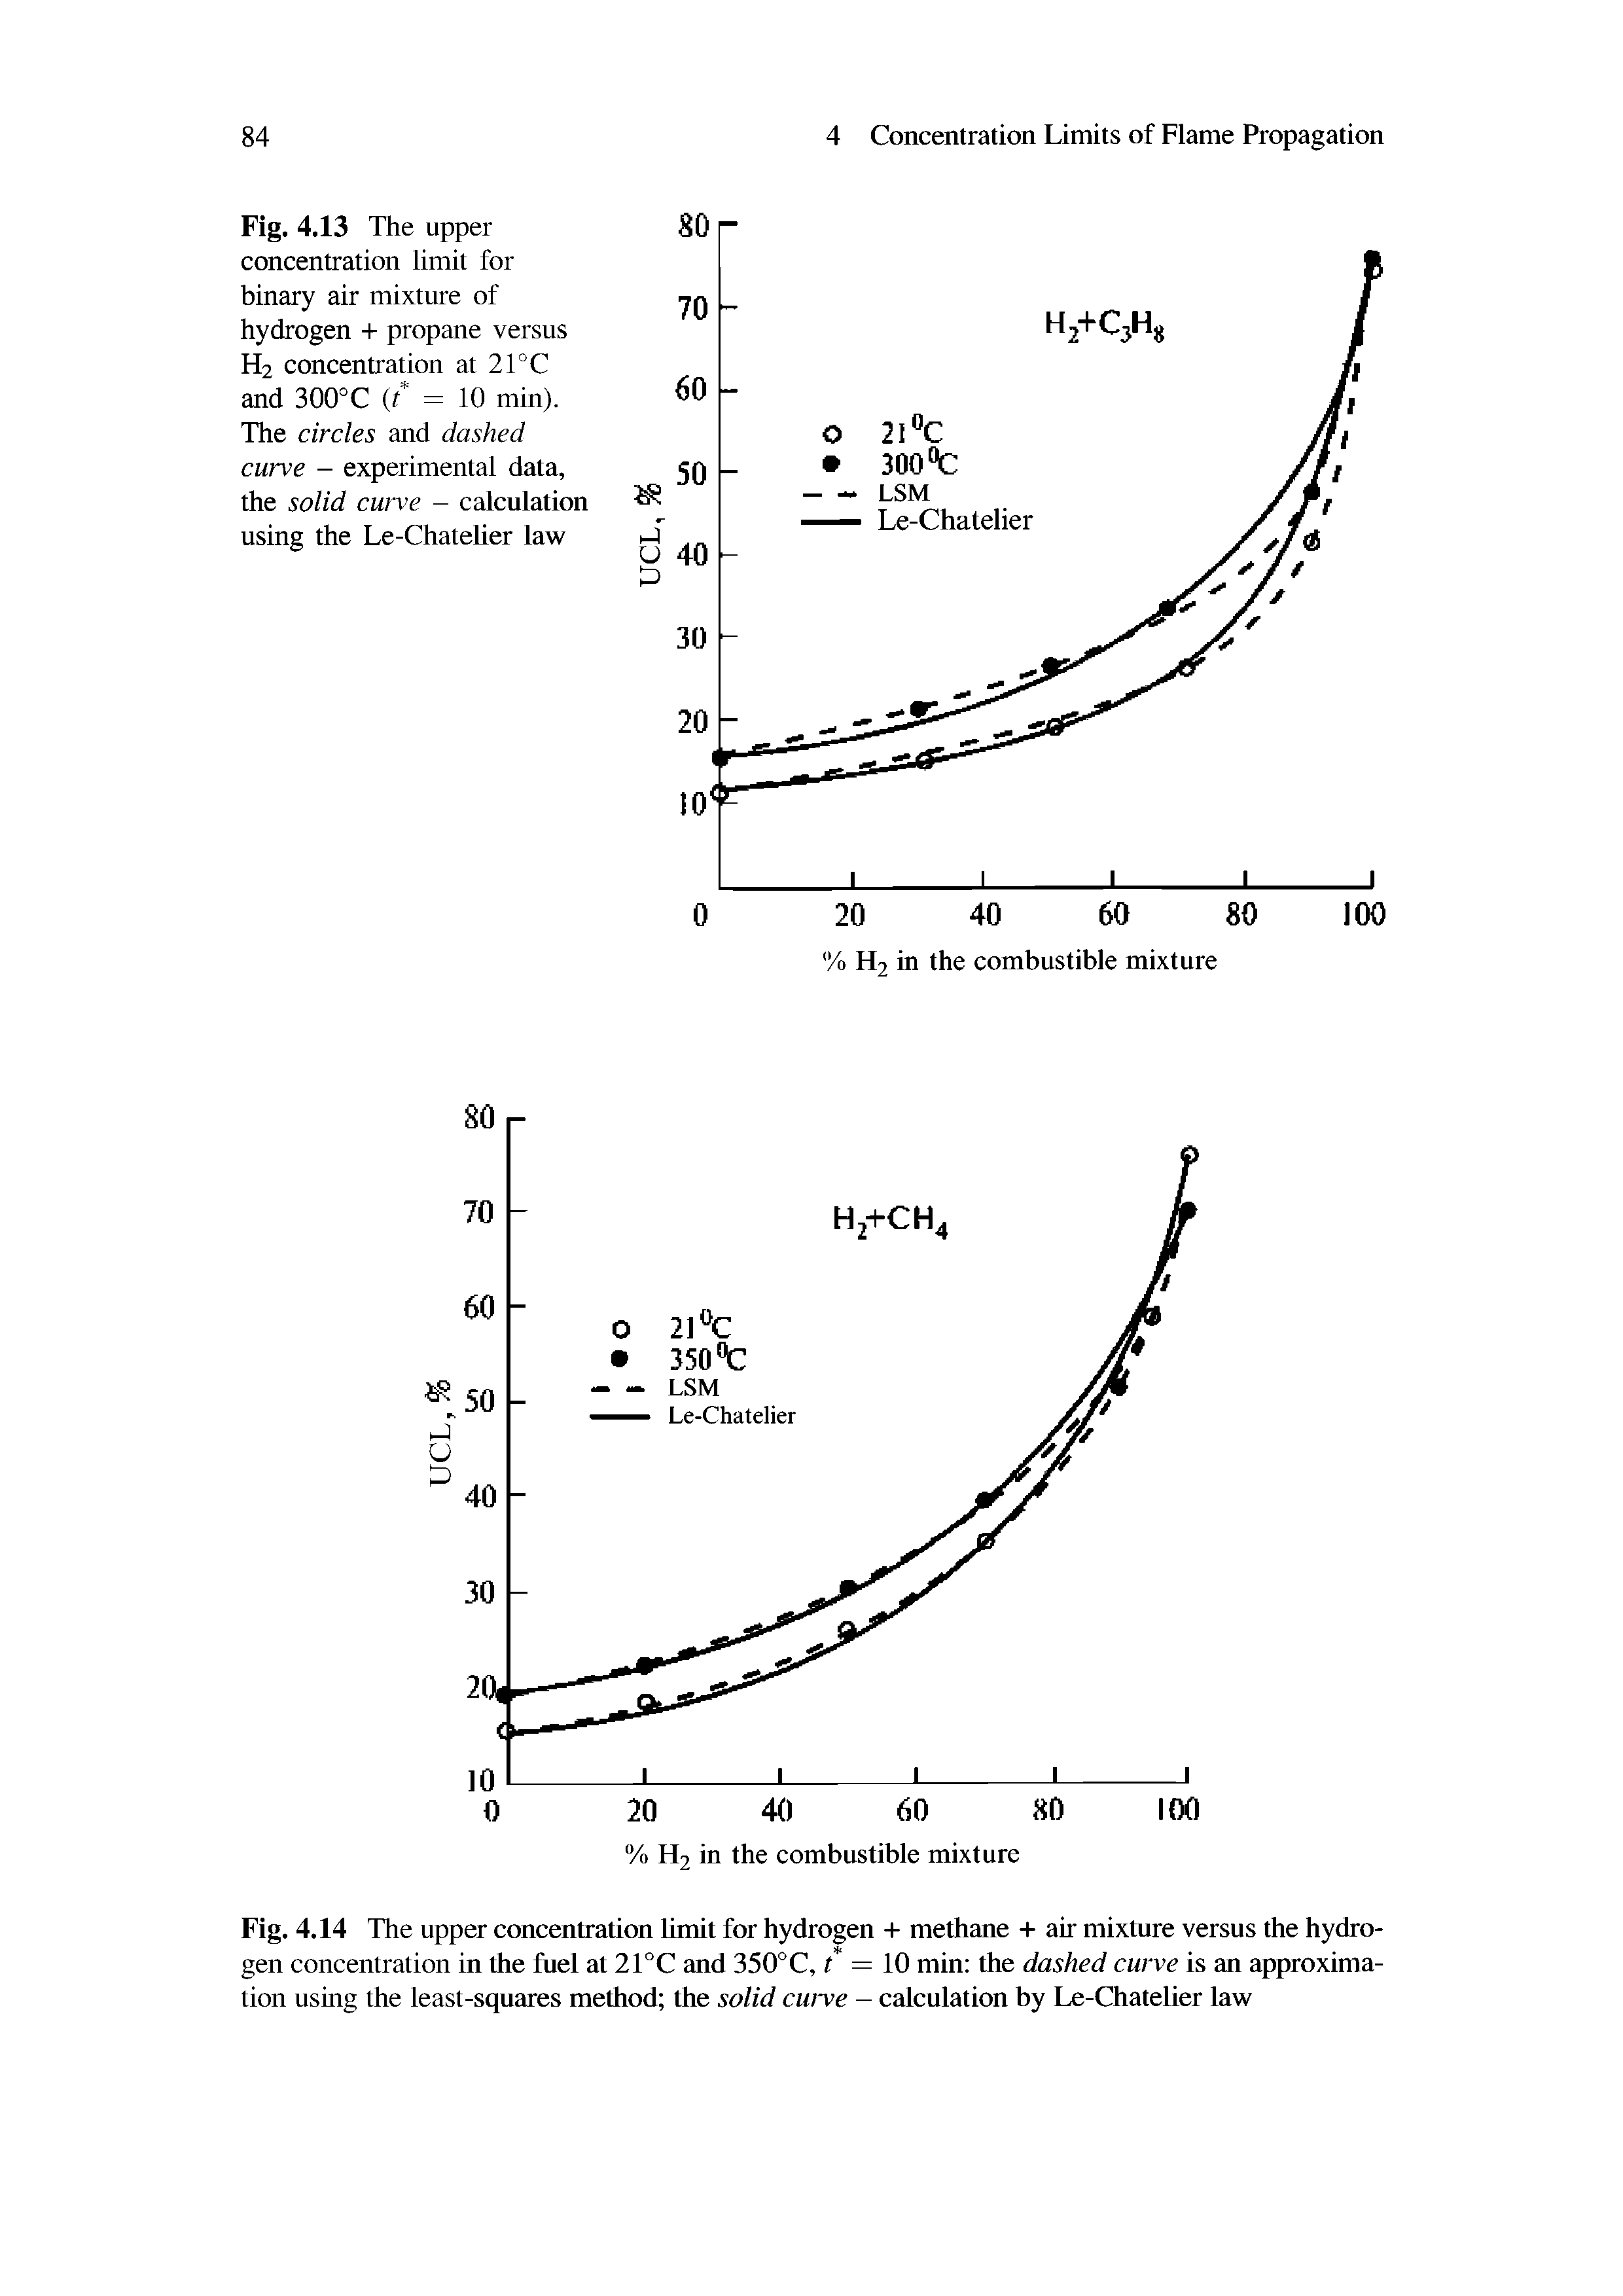 Fig. 4.13 The upper concentration limit for binary air mixture of hydrogen + propane versus H2 concentration at 21°C and 300°C t = 10 min). The circles and dashed curve - experimental data, the solid cuive - calculation using the Le-Chatelier law...